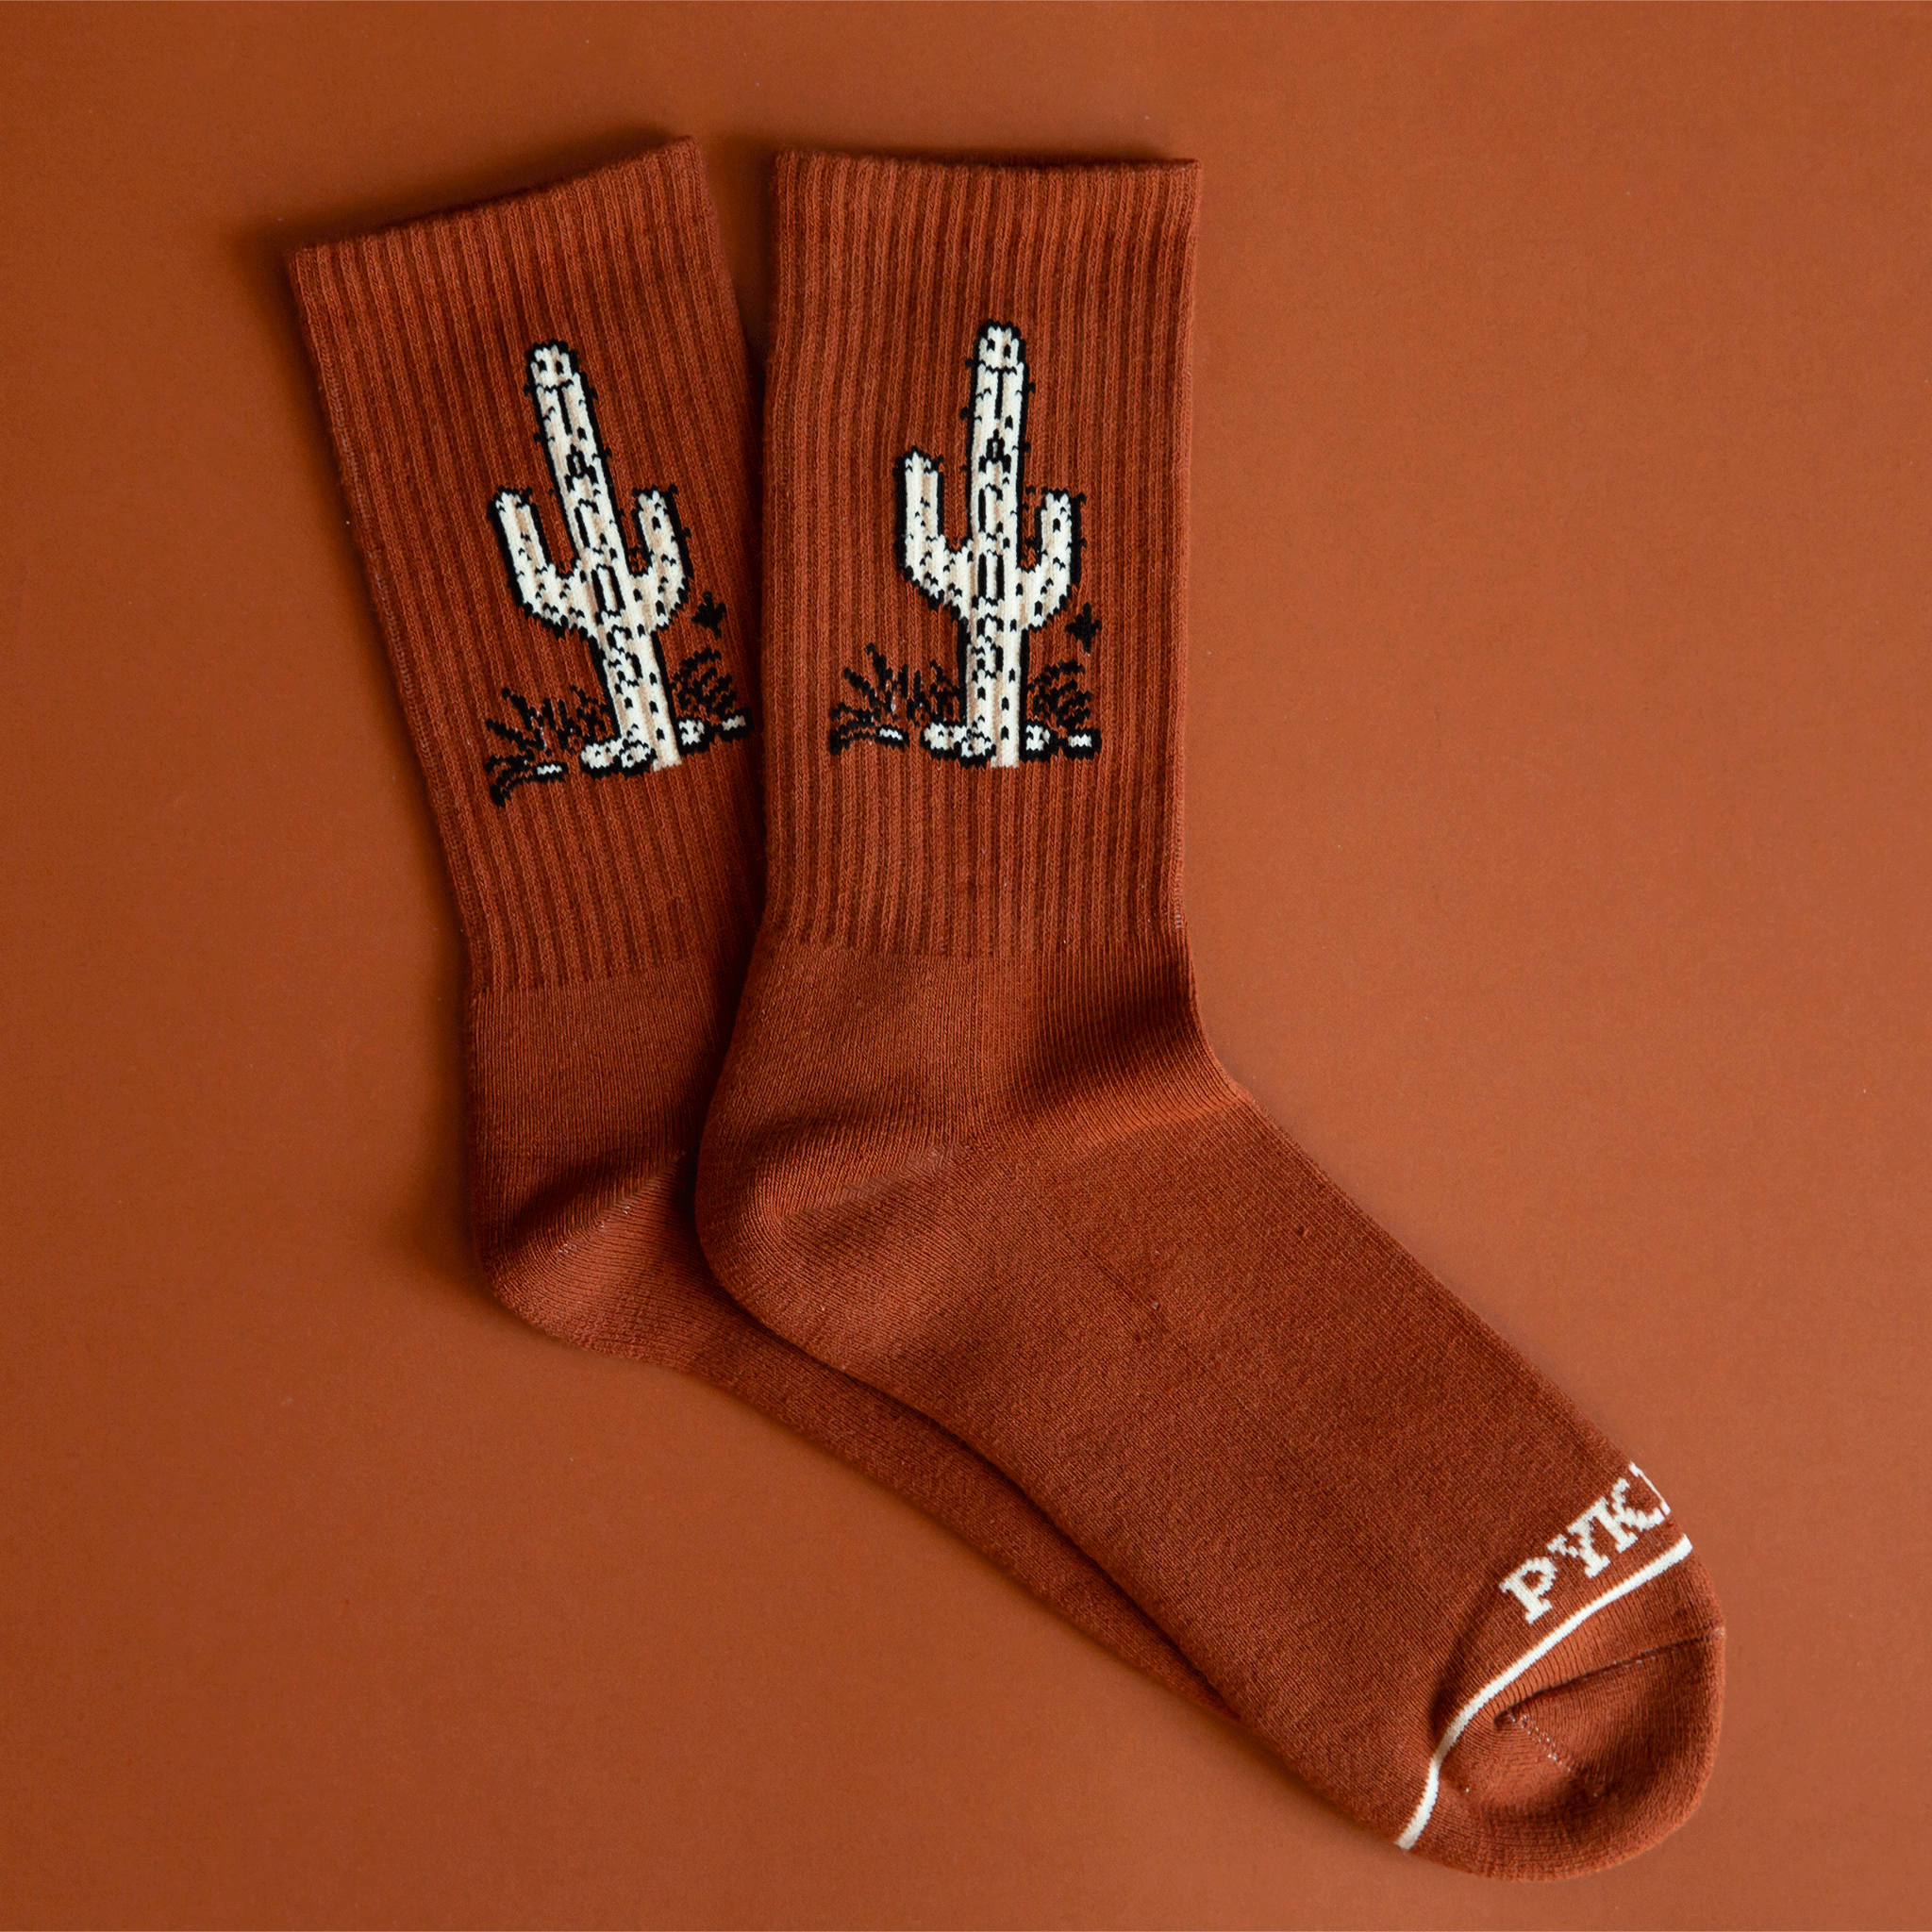 A burnt orange / brown socks with a cactus graphic with &quot;Taco&quot; written down the side of the cactus.